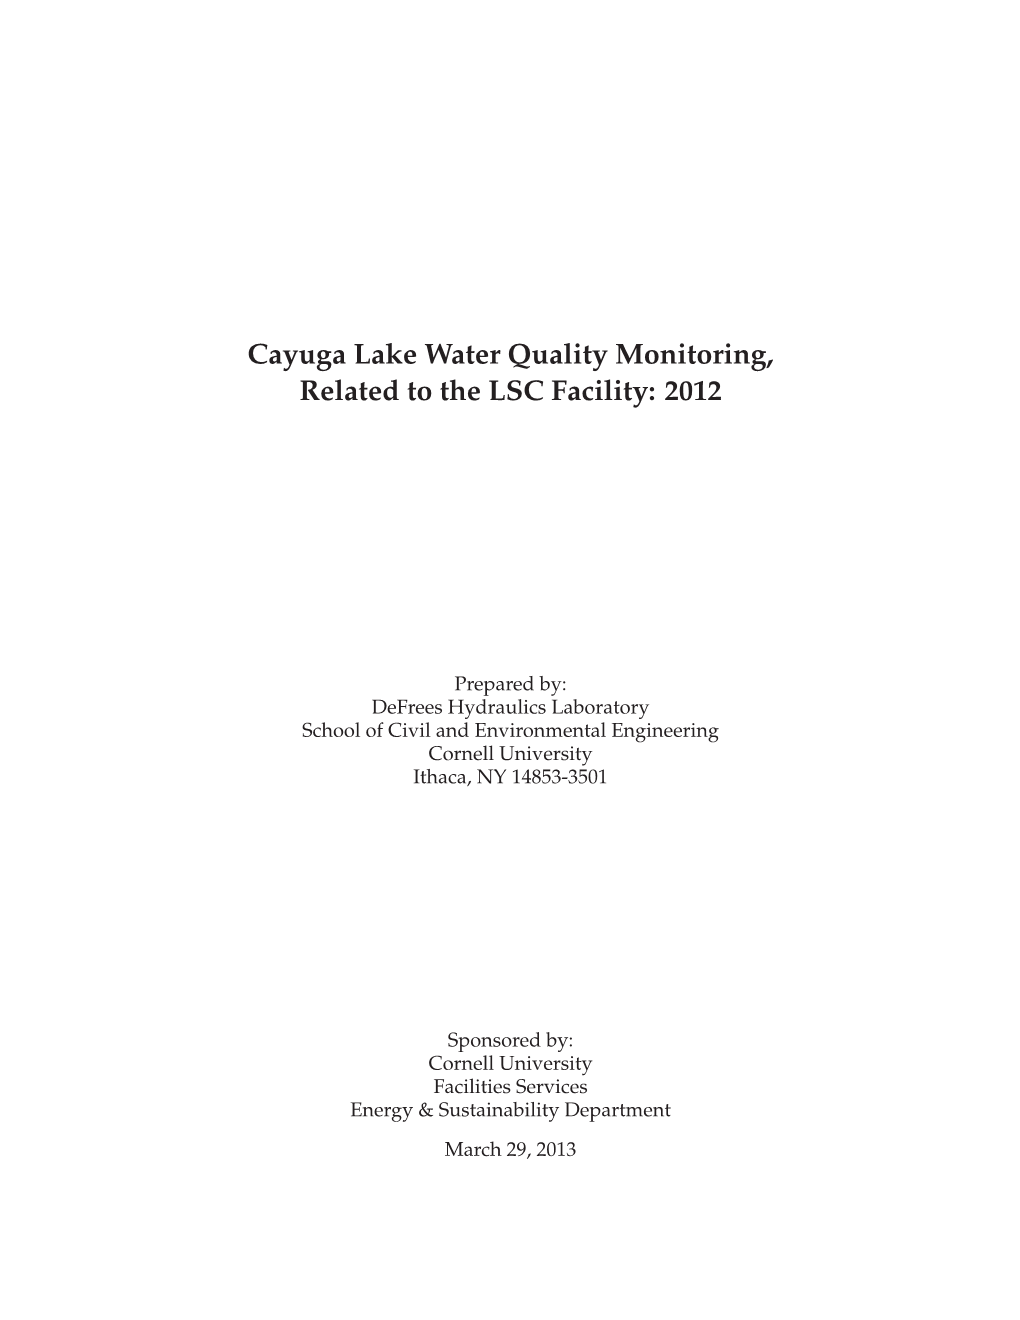 Cayuga Lake Water Quality Monitoring, Related to the LSC Facility: 2012